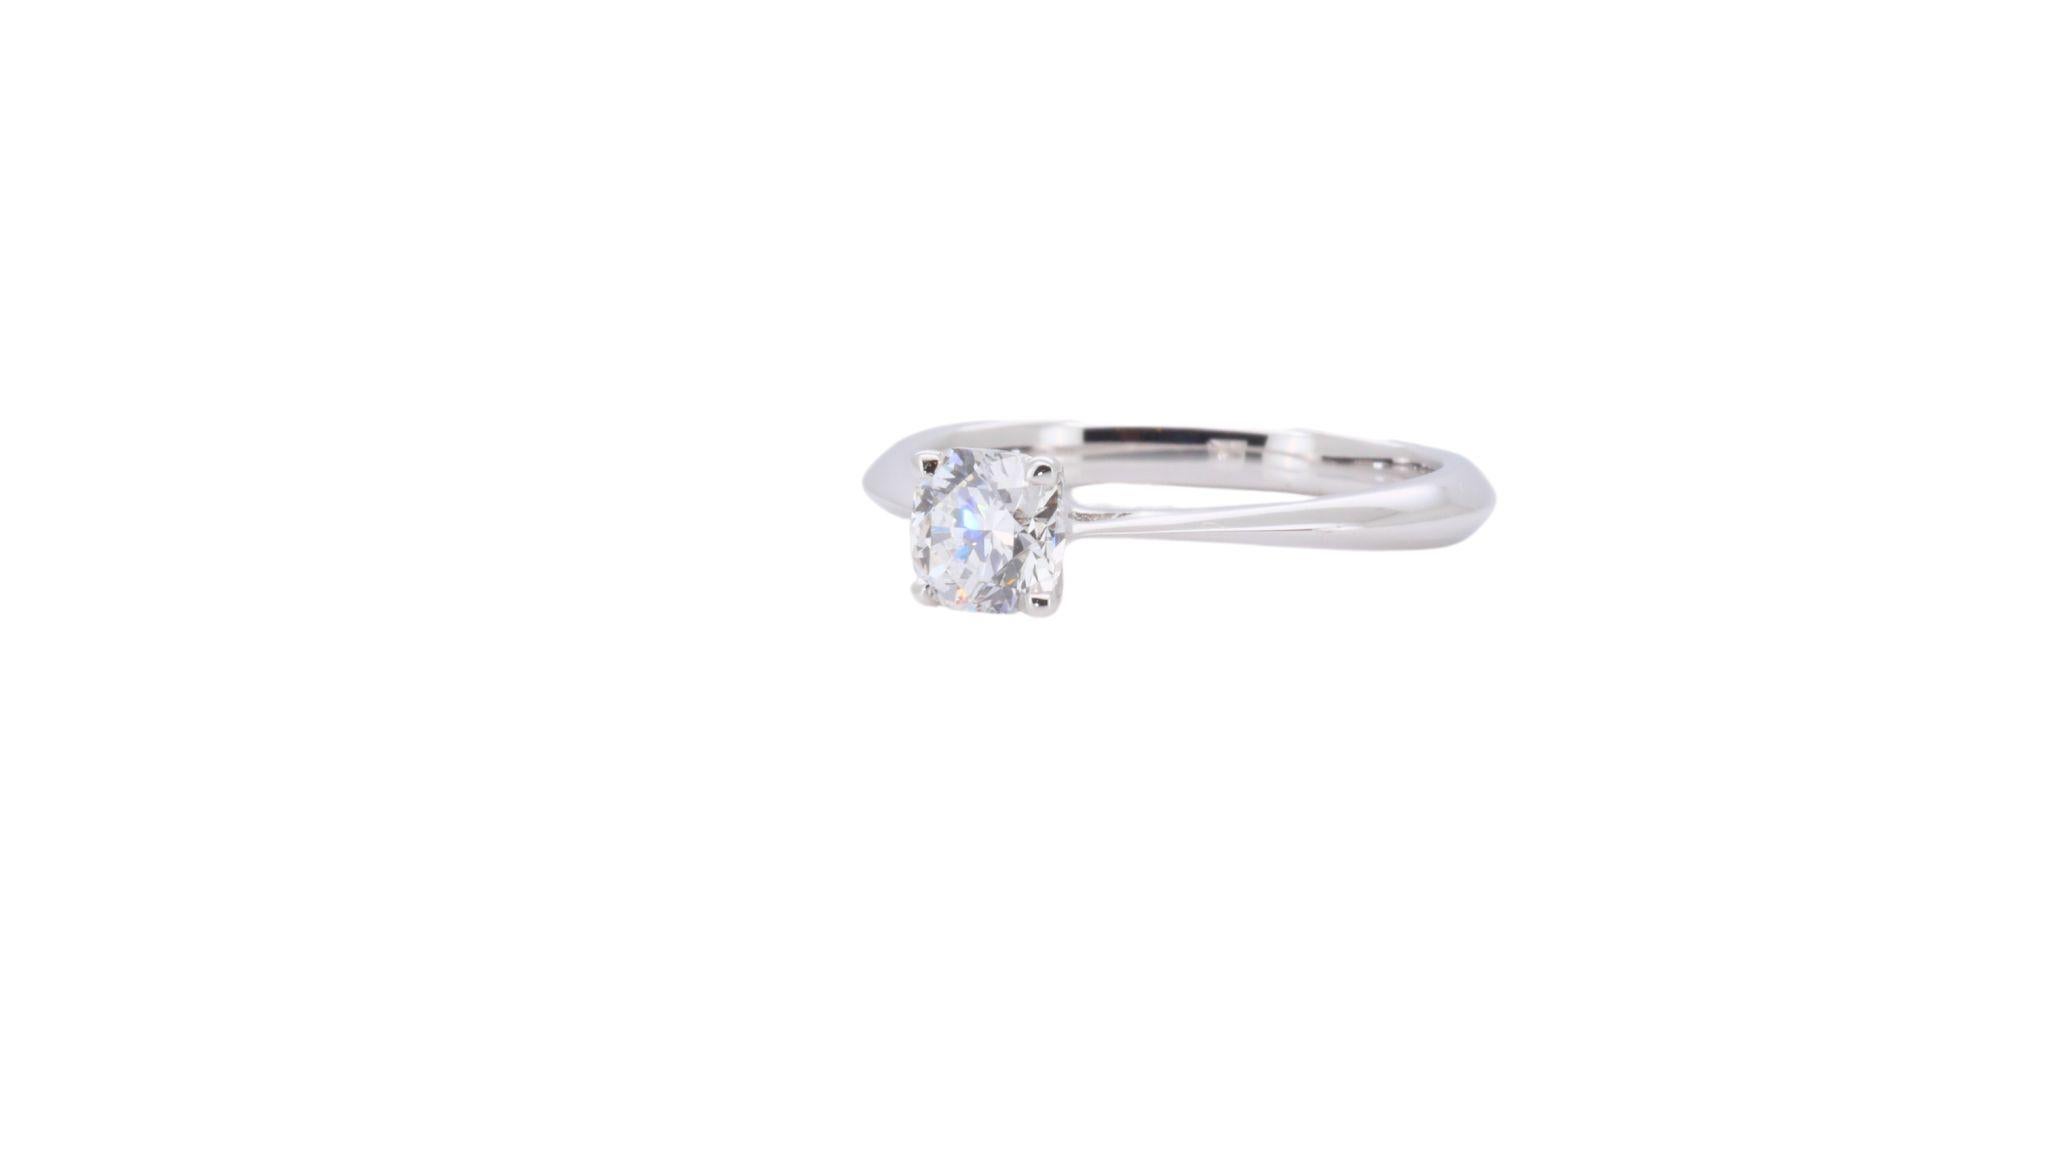 Marvelous 18k White Gold Solitaire Ring w/ 0.47 Carat Natural Diamonds AGS Cert In New Condition For Sale In רמת גן, IL